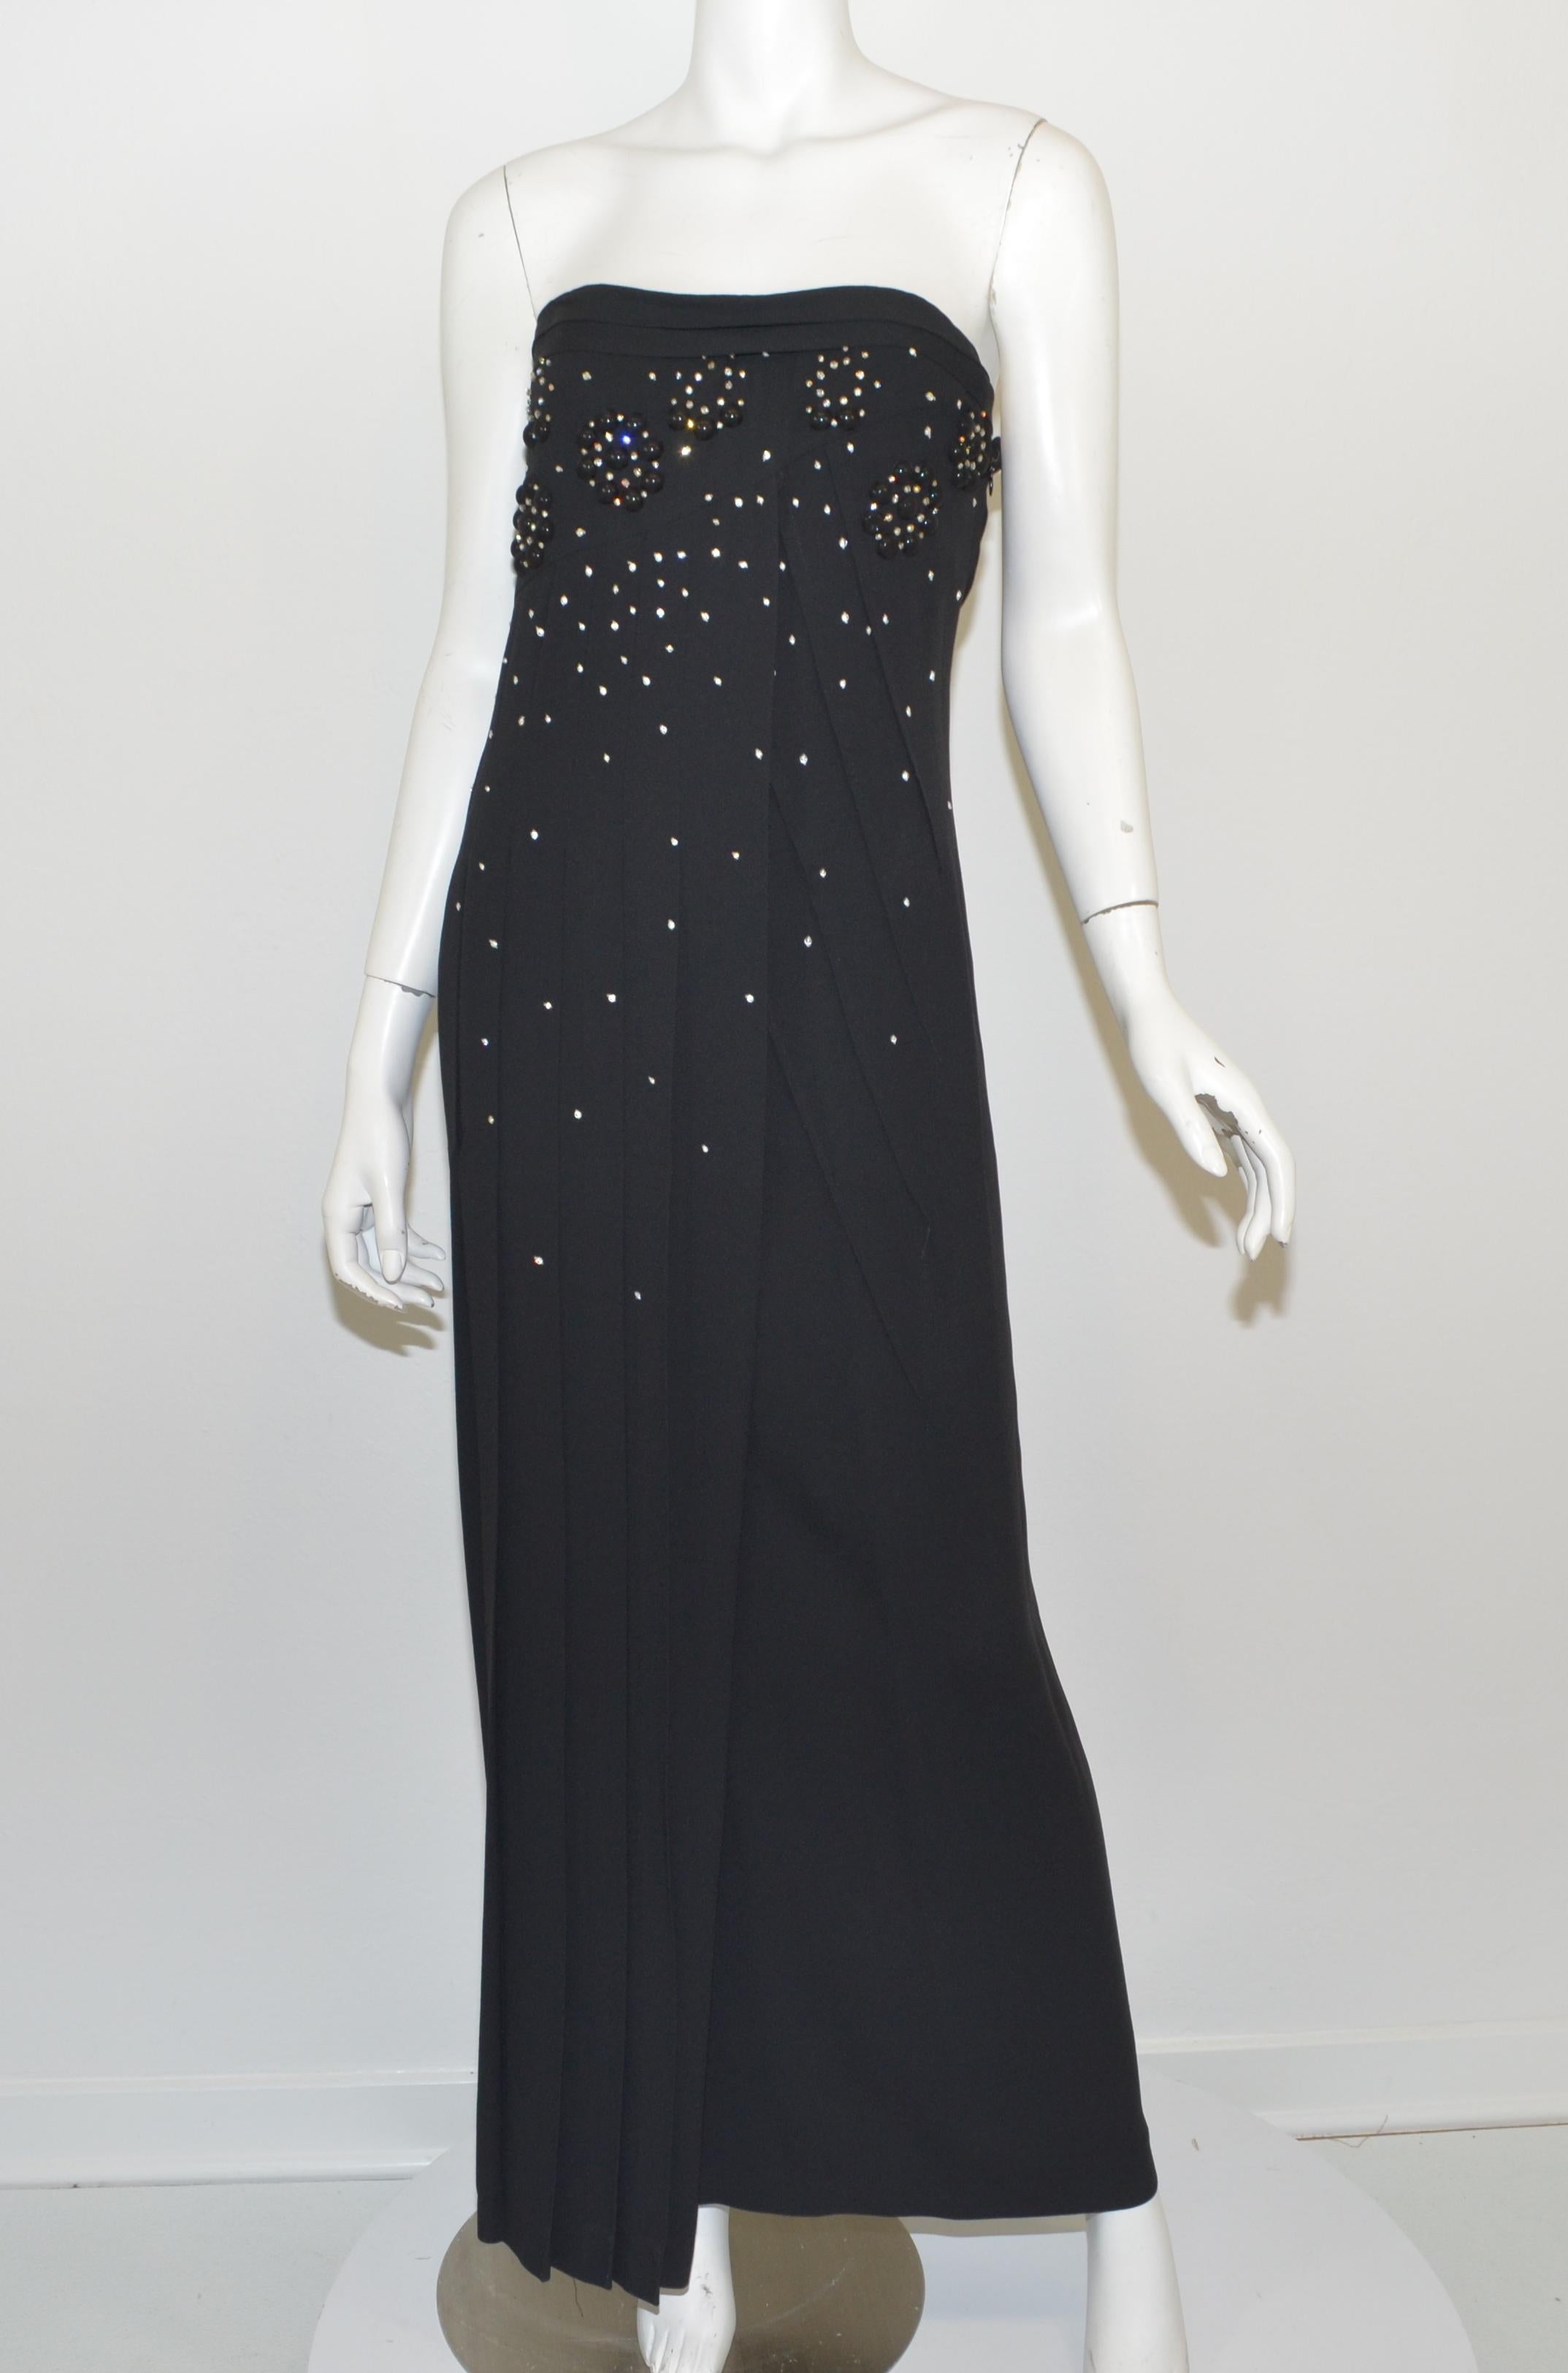 Black crepe, column dress with black beads and rhinestone embellishing along the bust and bodice, front of the dress has a pin-tucked/pleated design with a side zipper closure and a built in, boned bustier bra. 

Measurements:
Bust 26”
Waist